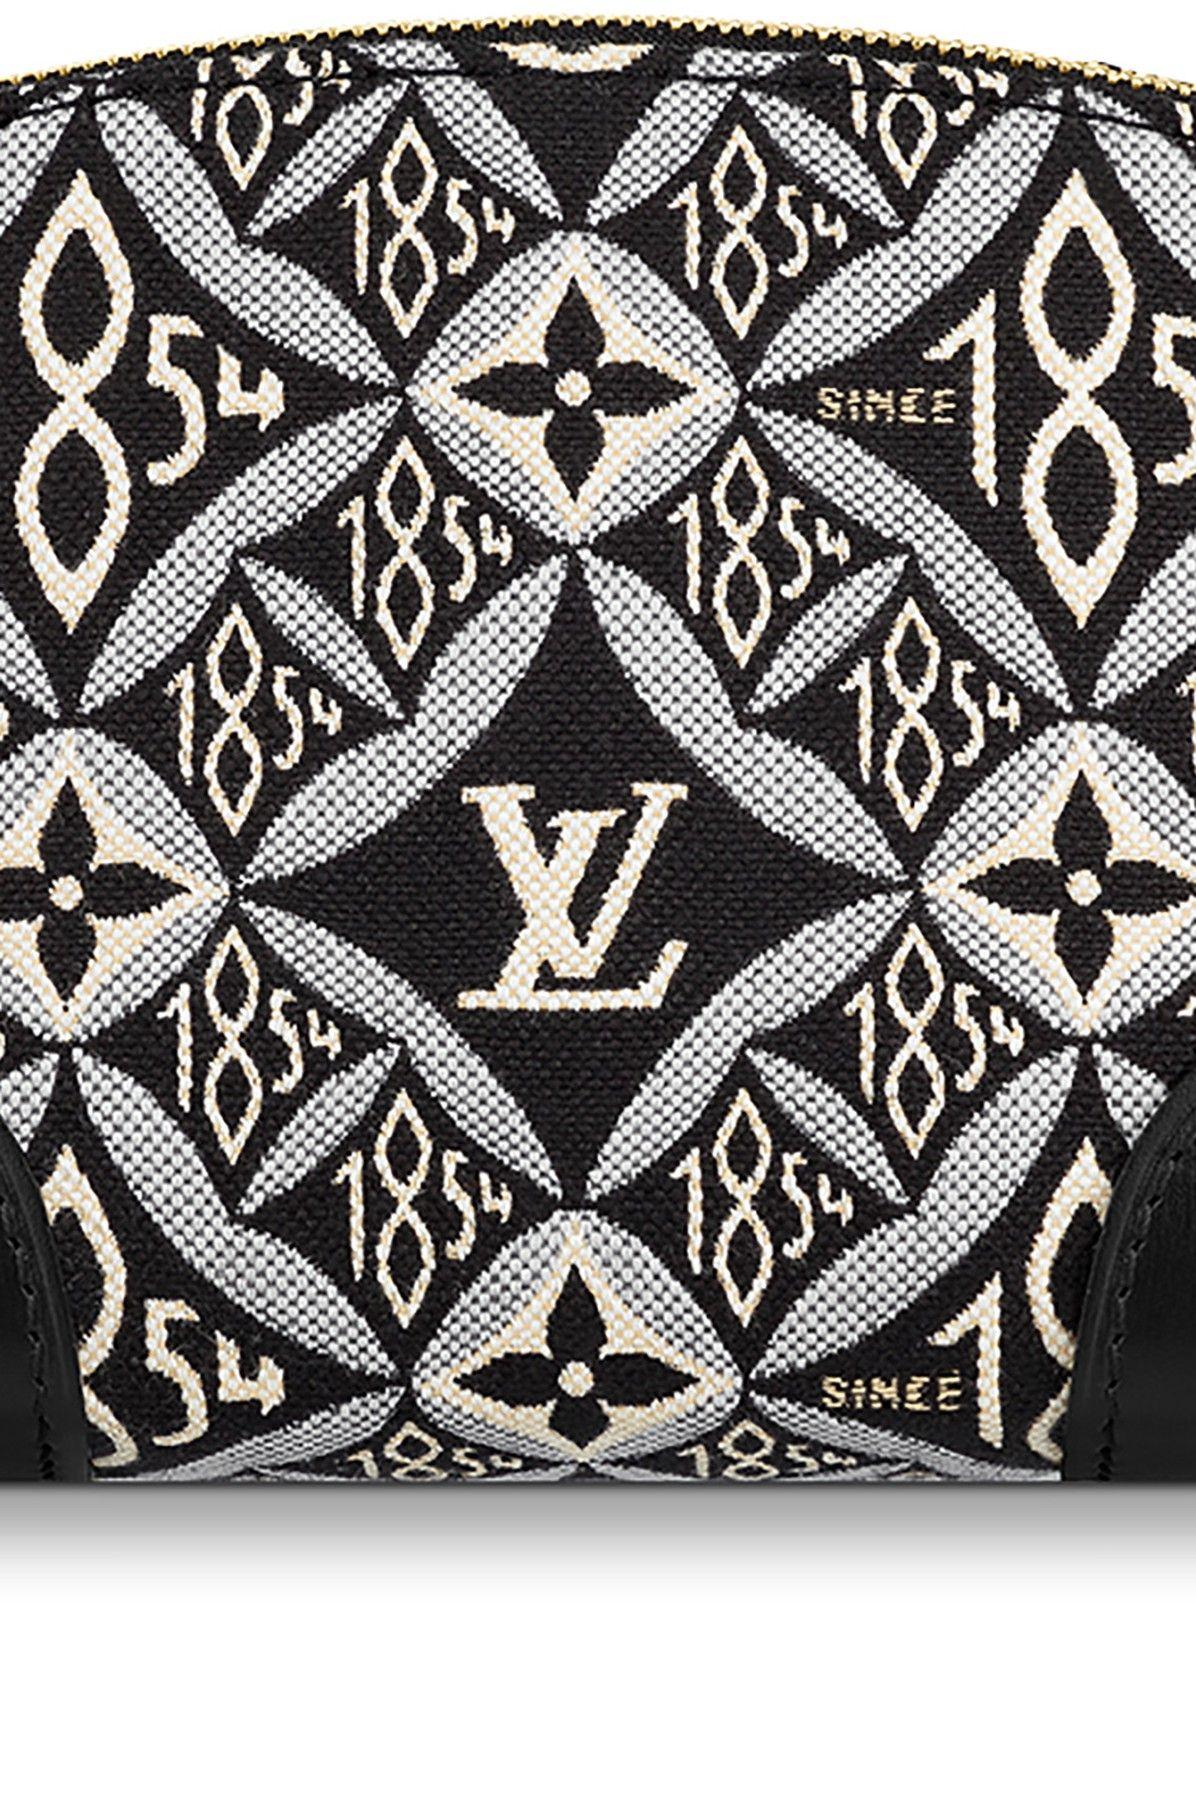 Louis Vuitton Since 1854 Cosmetic Pouch Pm in Black | Lyst